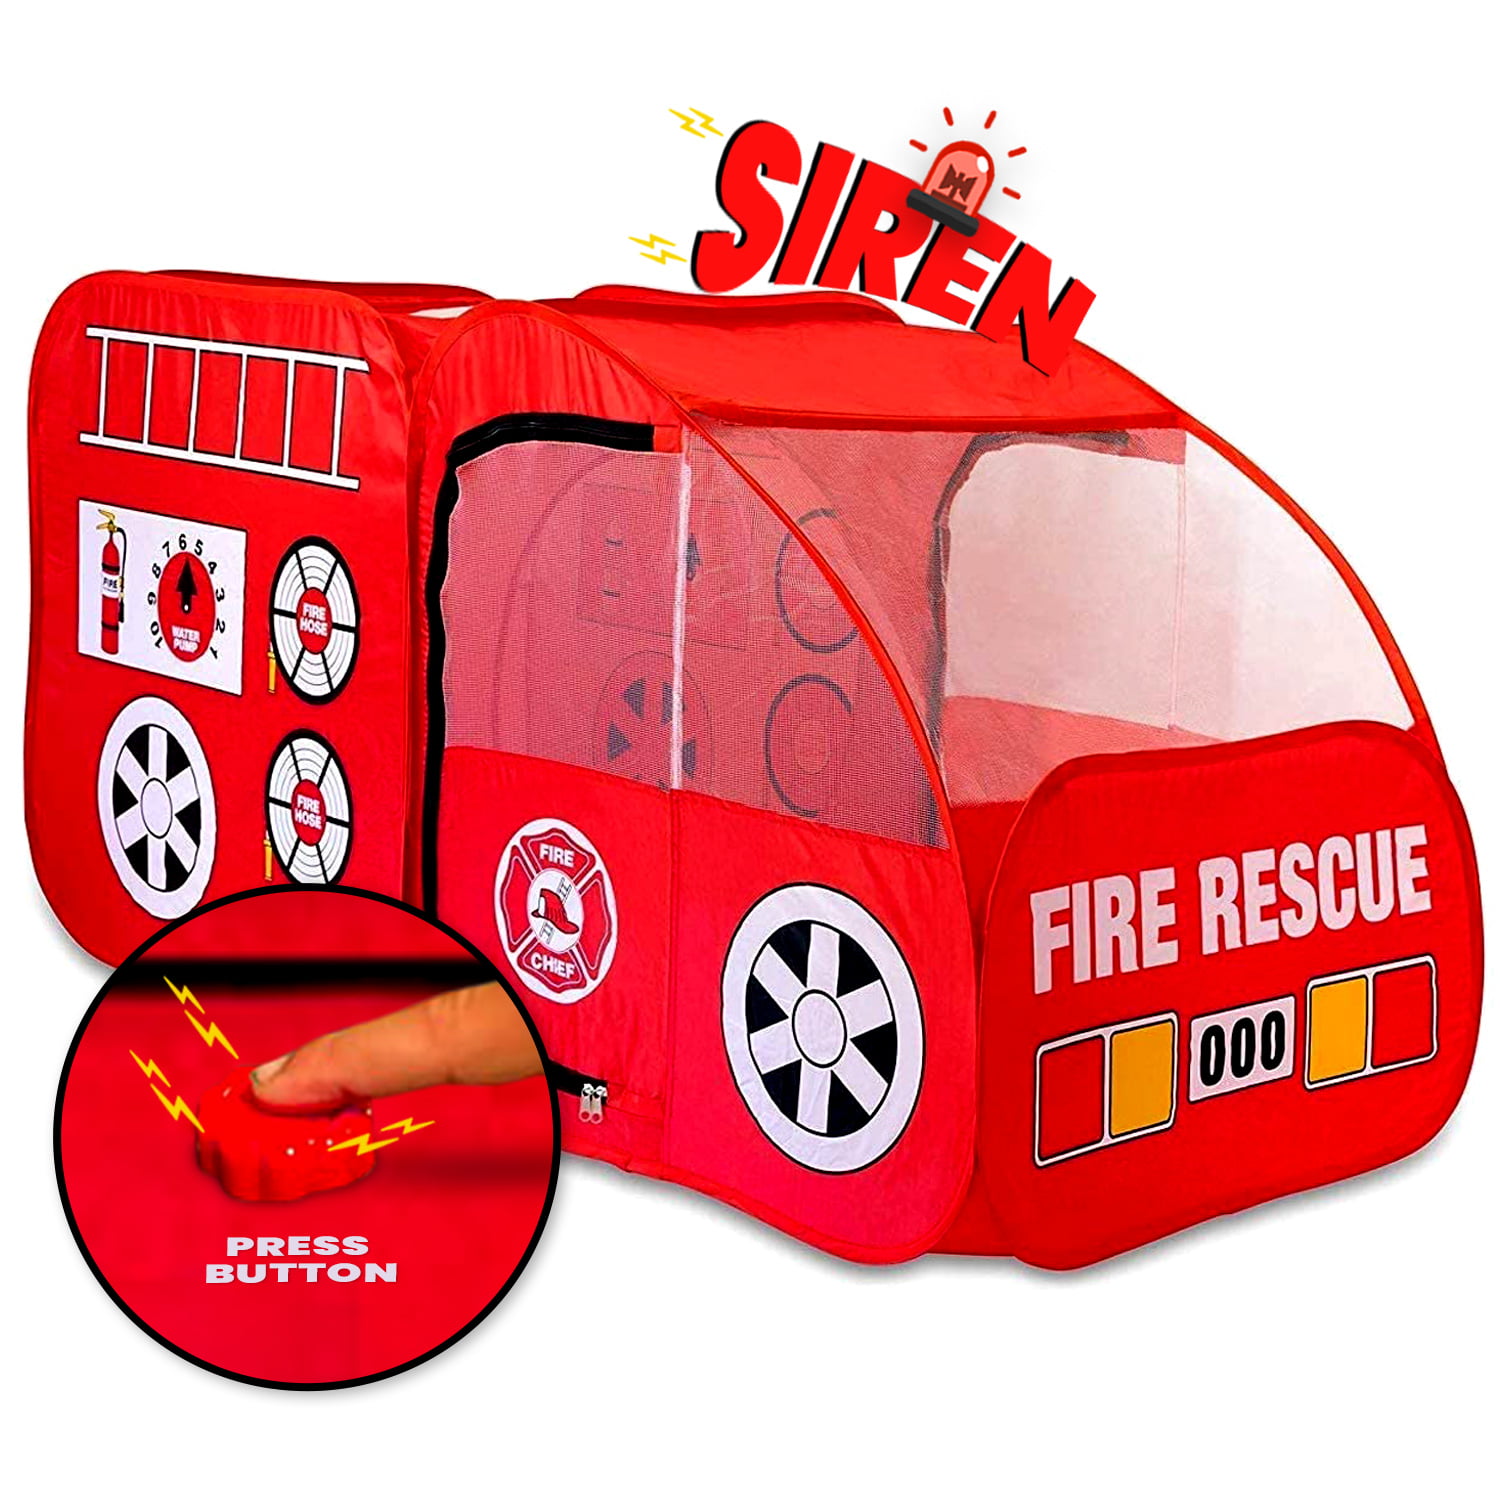 Fire Truck Tent for Kids Boys & Girls –Red Fire Engine Pop Up Pretend Toddlers 